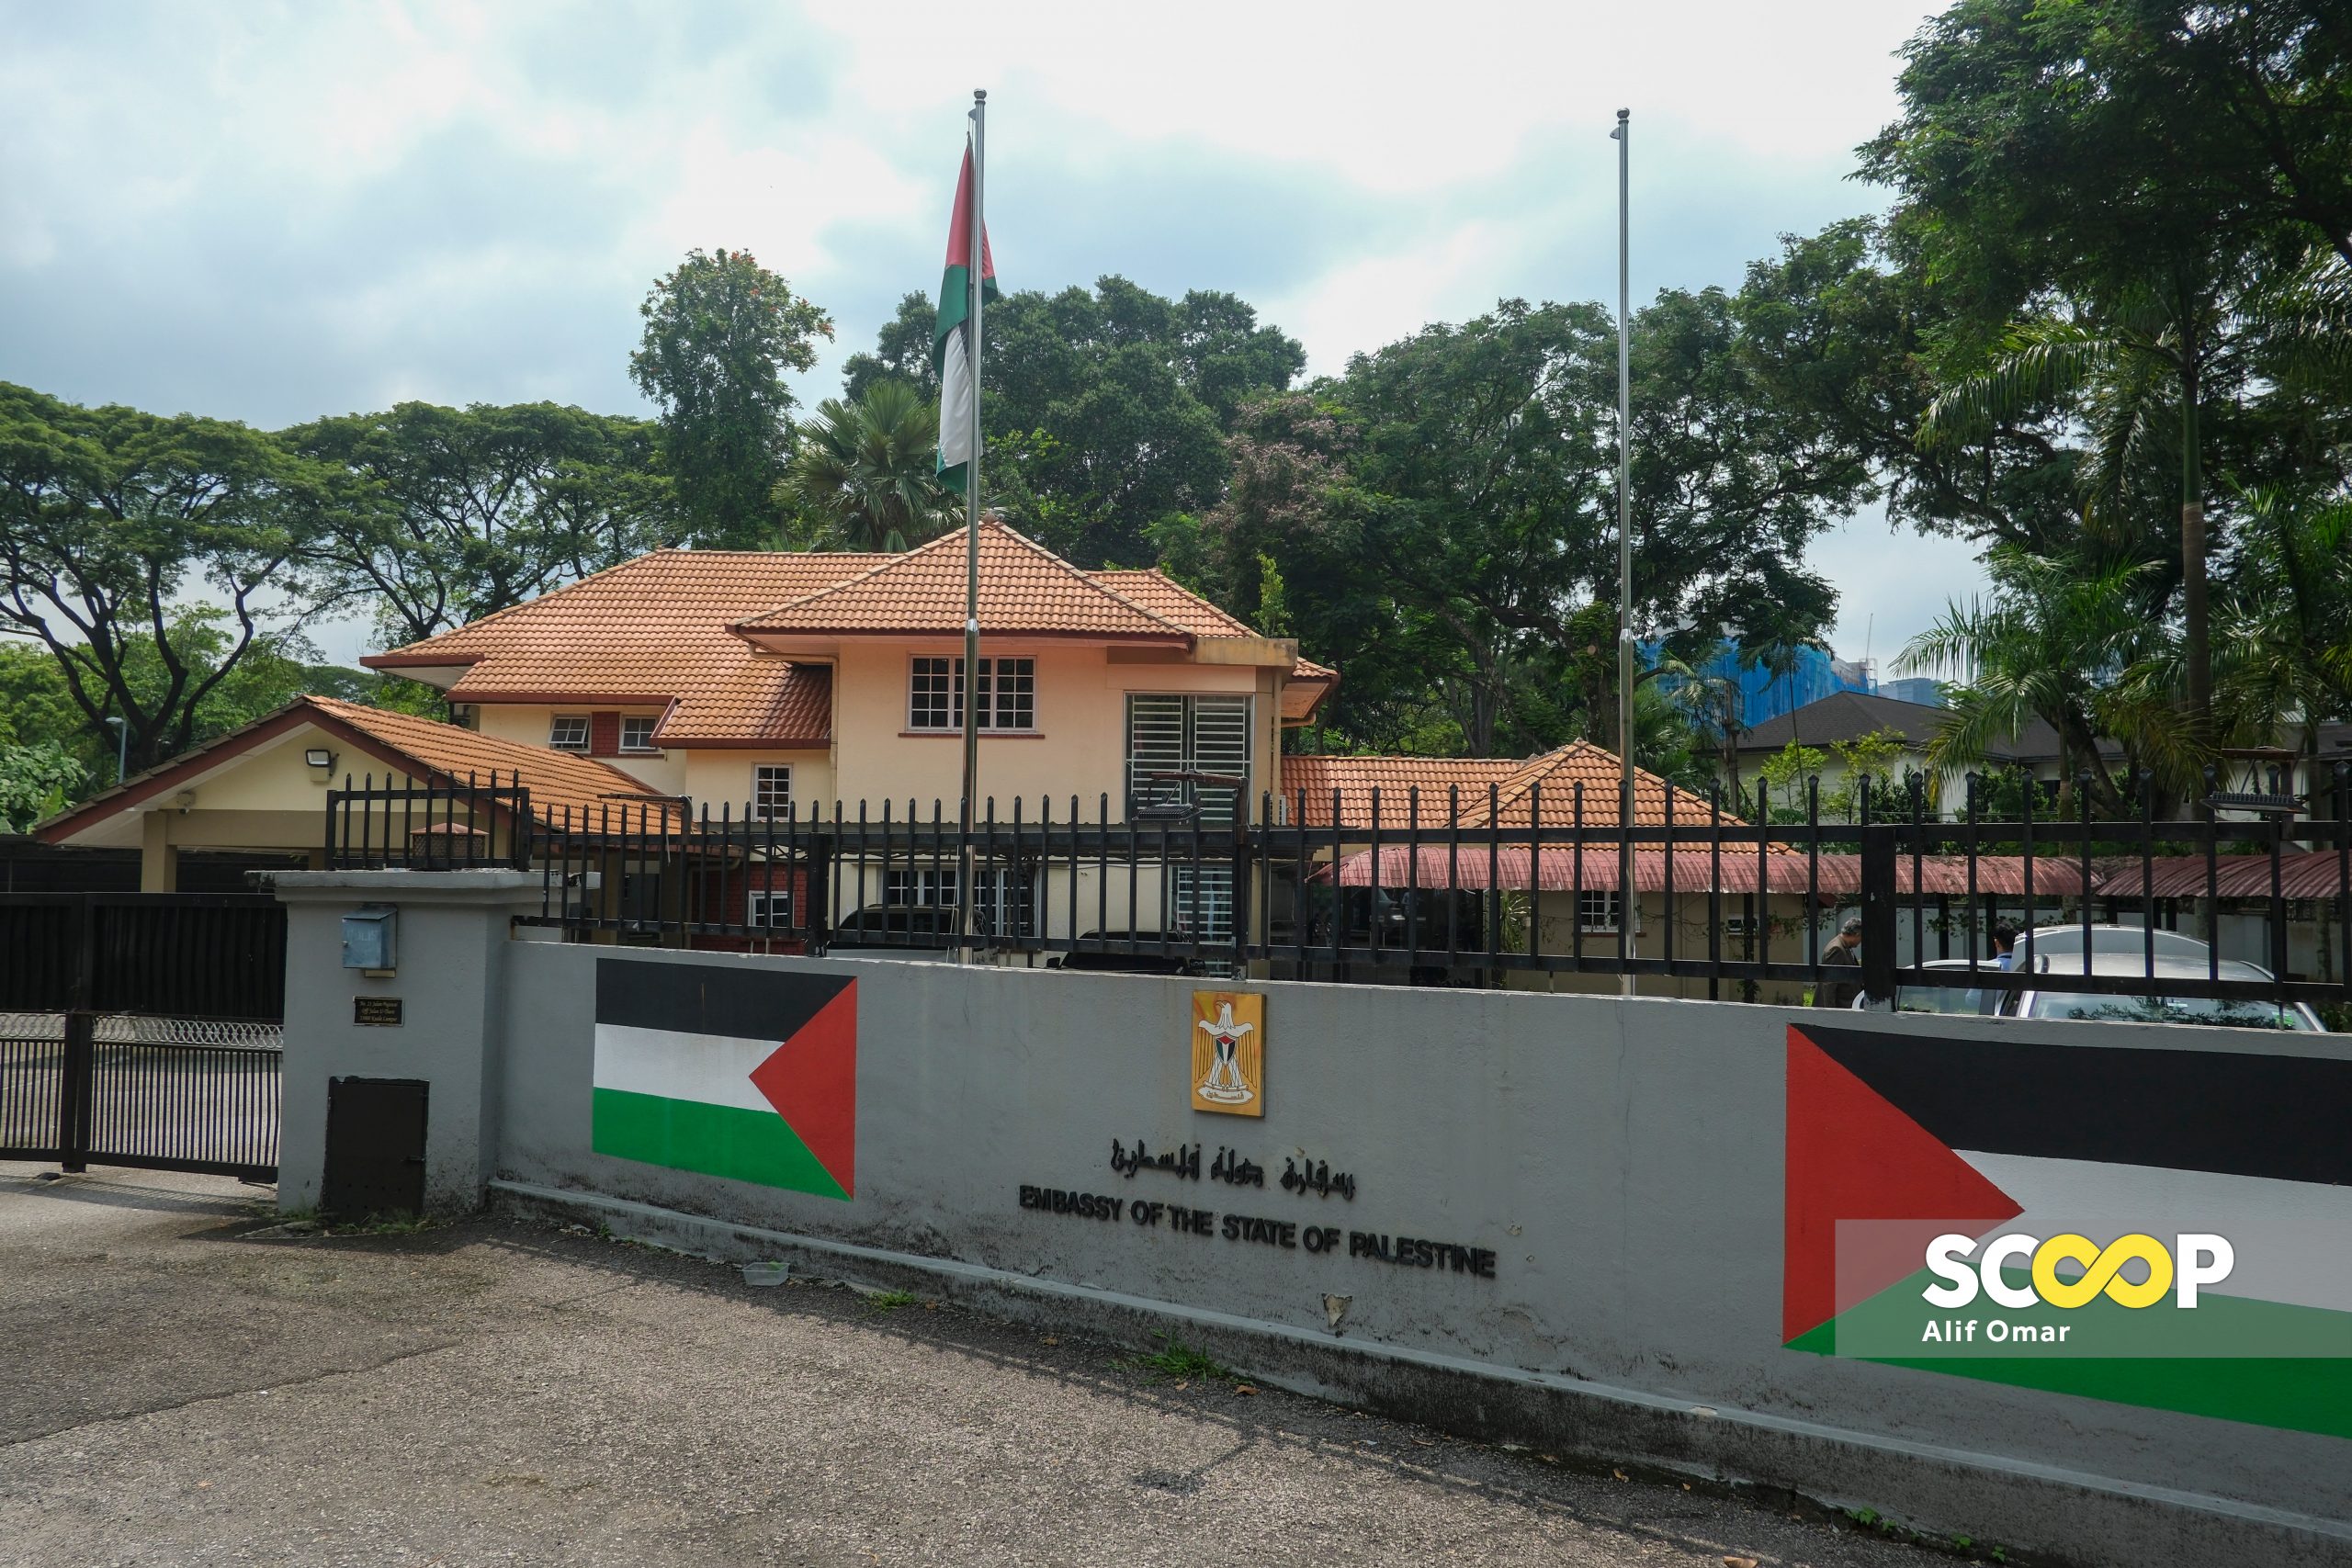 Can the plaintiff still claim against the insurance company of Palestinian embassy car? – Mohamed Hanipa Maidin